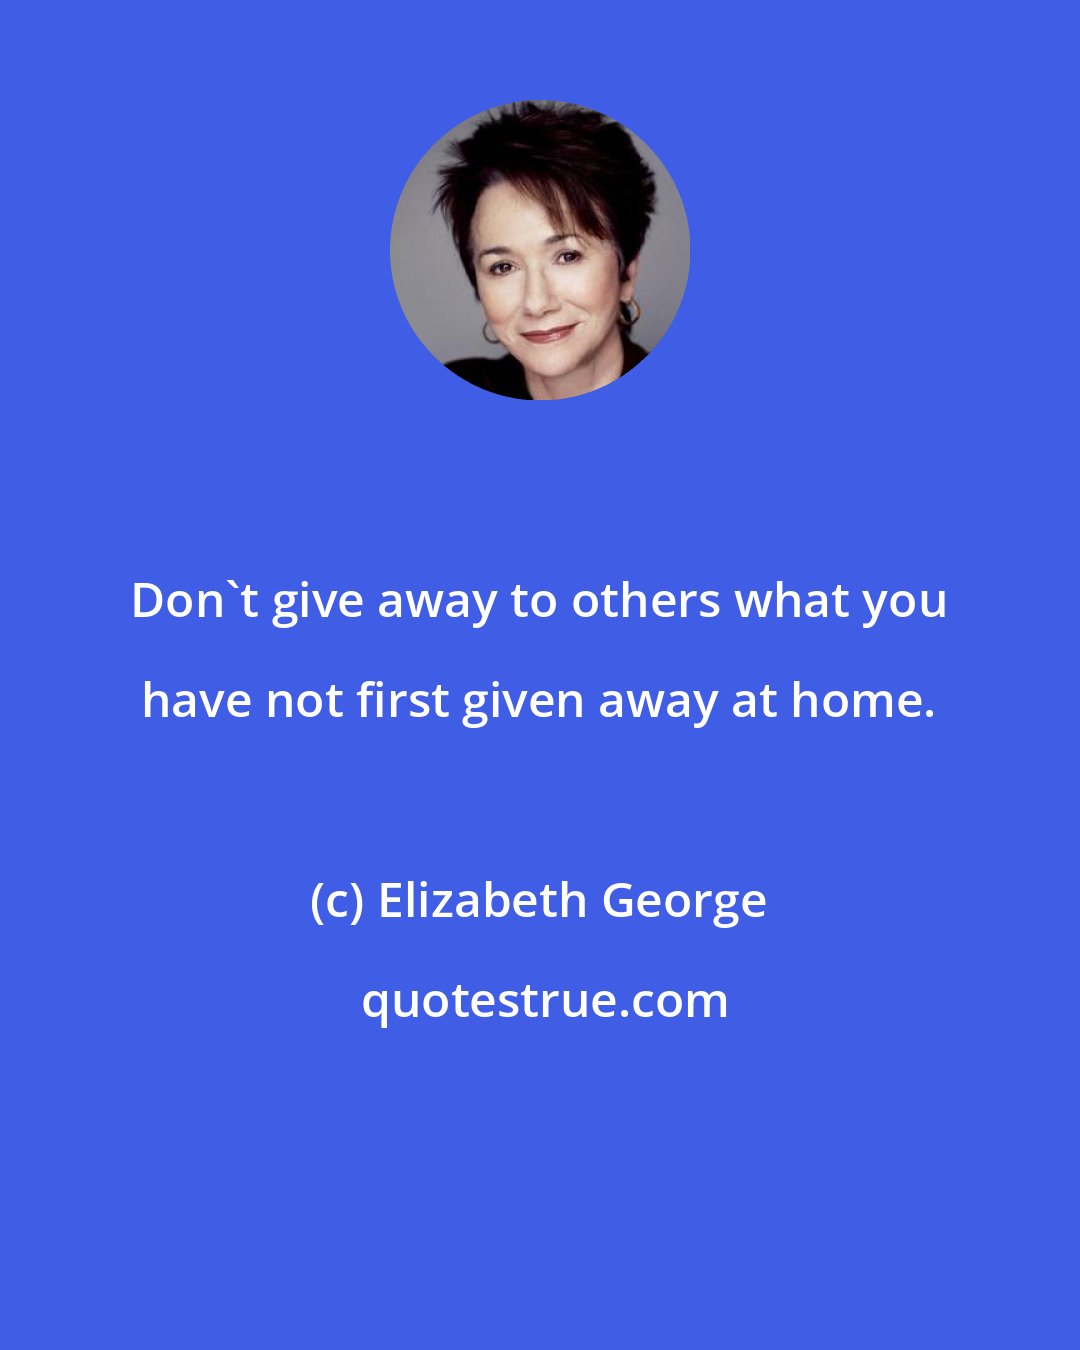 Elizabeth George: Don't give away to others what you have not first given away at home.